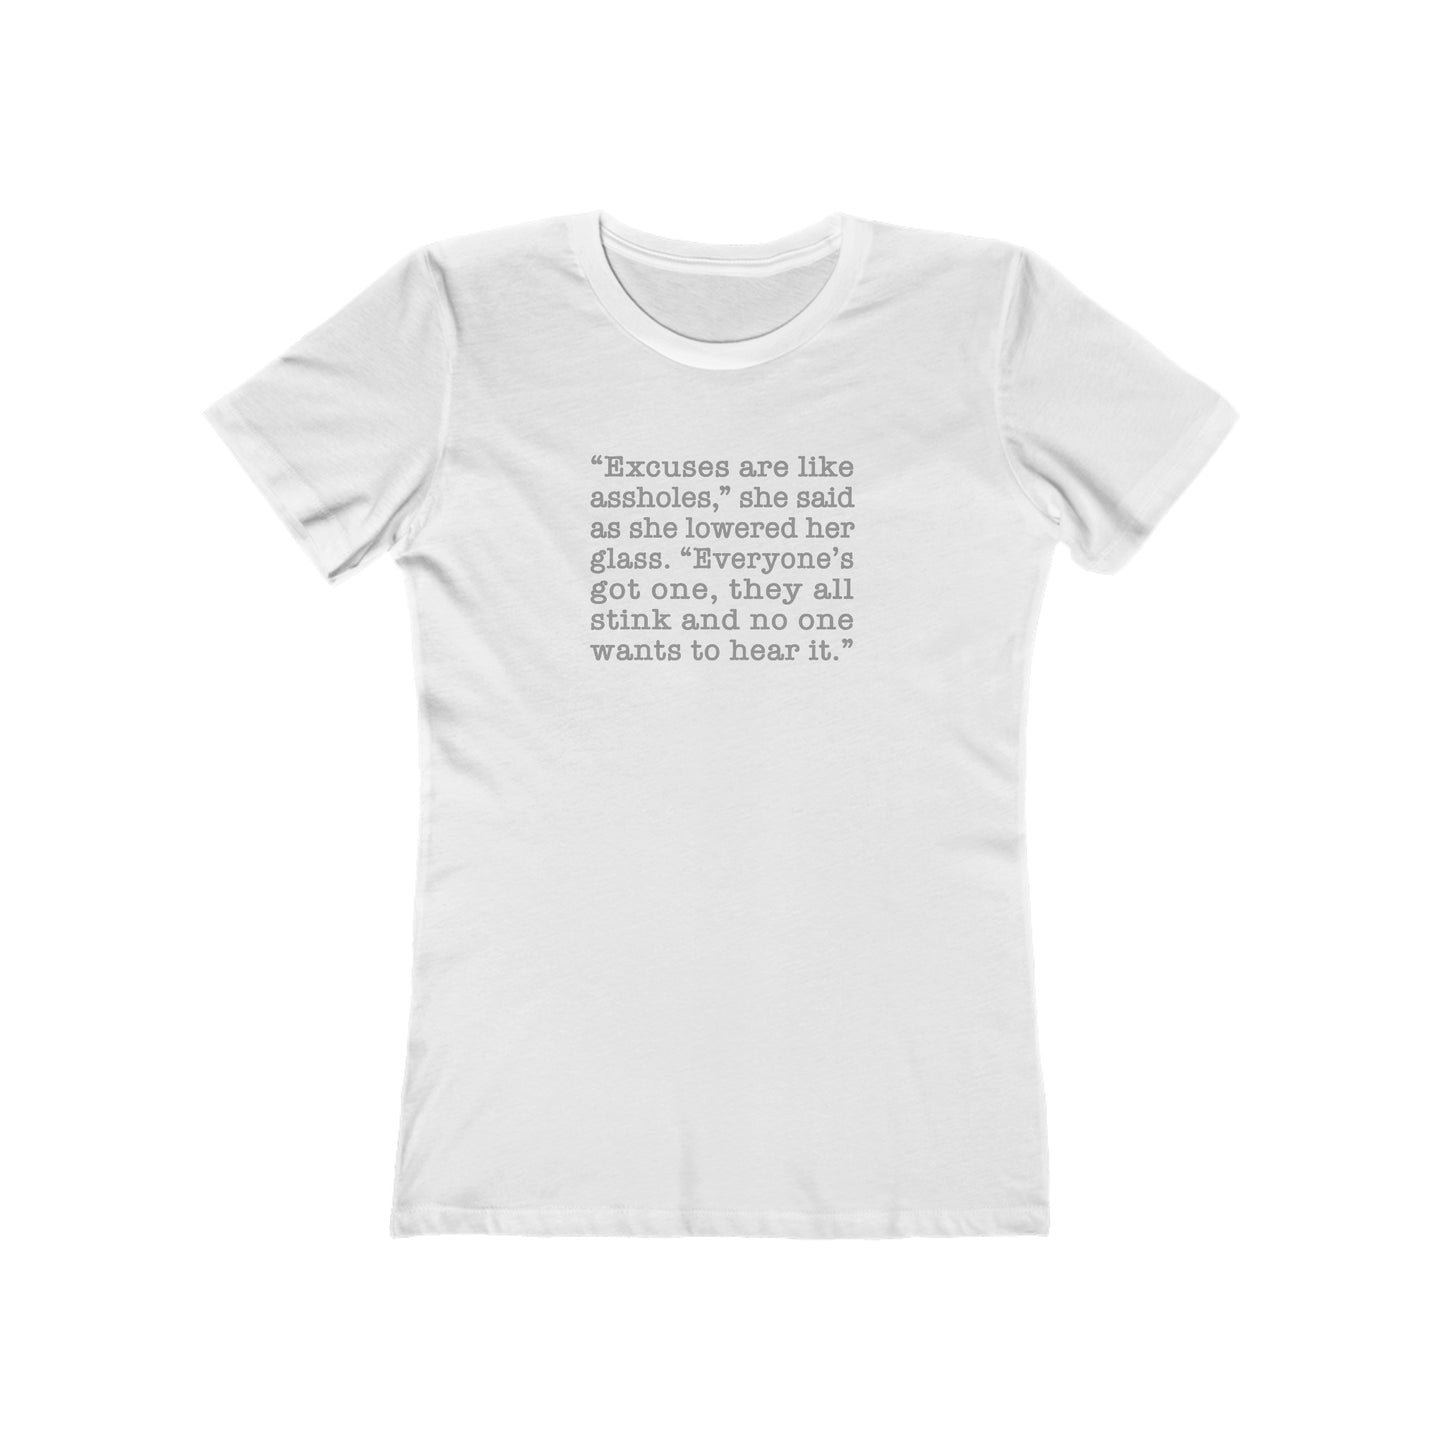 Excuses are Like Assholes - Women's T-Shirt